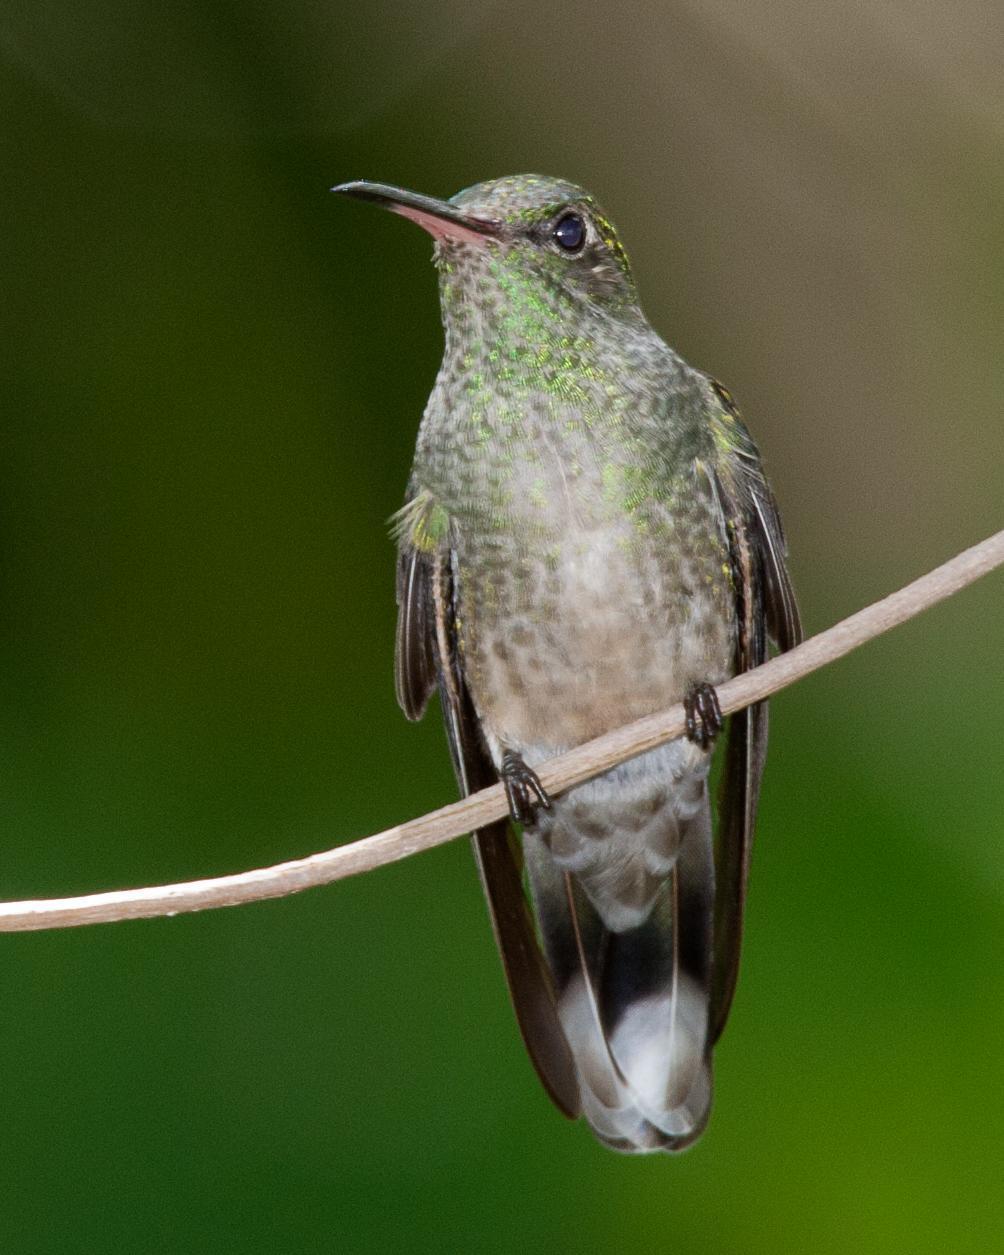 Scaly-breasted Hummingbird Photo by Robert Lewis